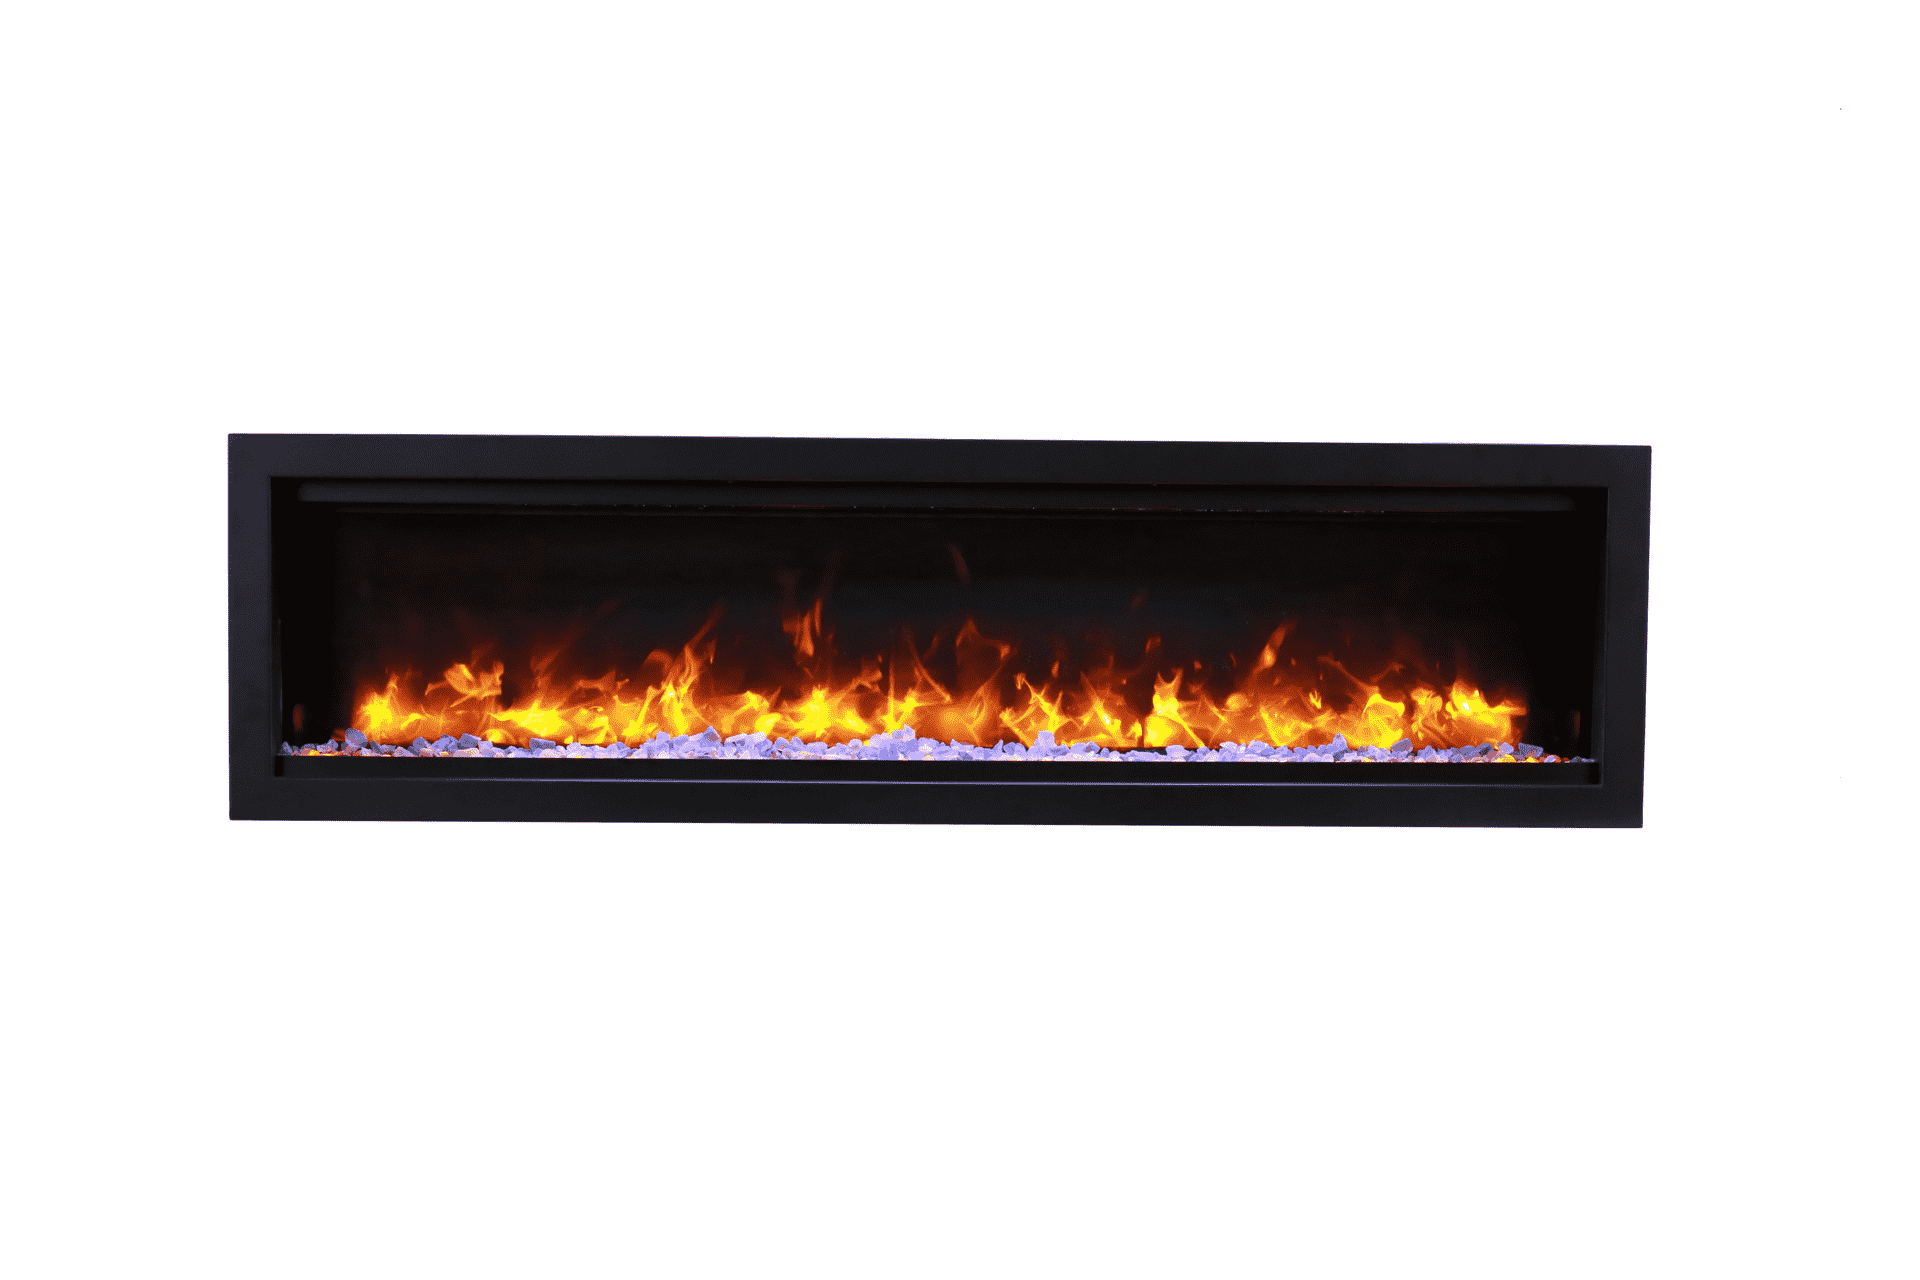 Amantii 74" Symmetry 3.0 Built-in Smart WiFi Electric Fireplace -SYM-74- Front View With Pebbles Orange Flame